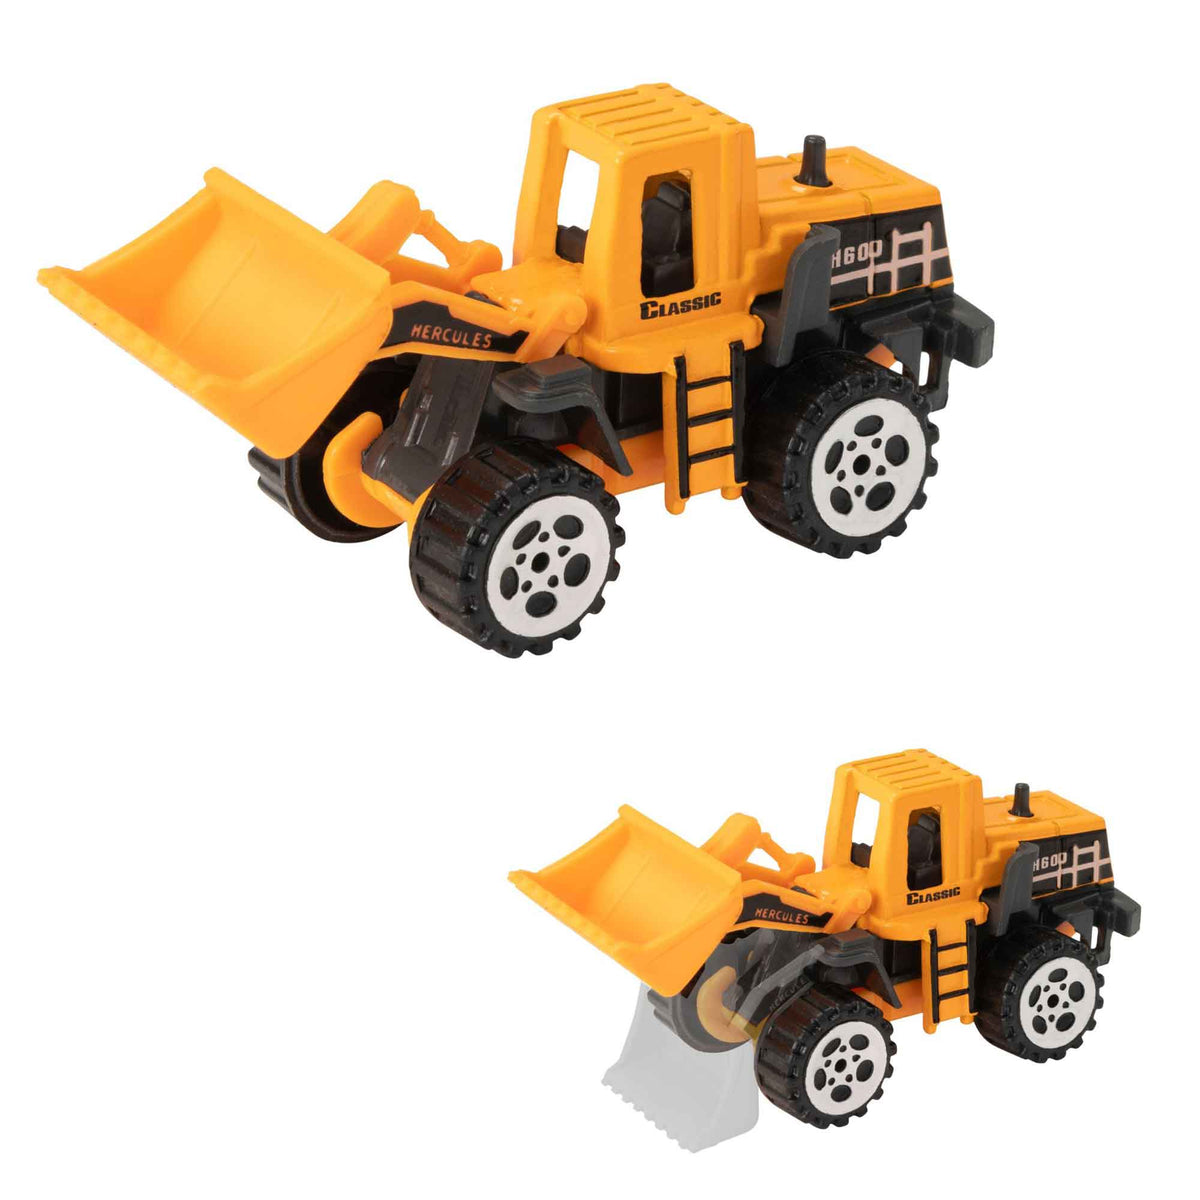 Teamsterz Construction Transporter Toy Truck Playset